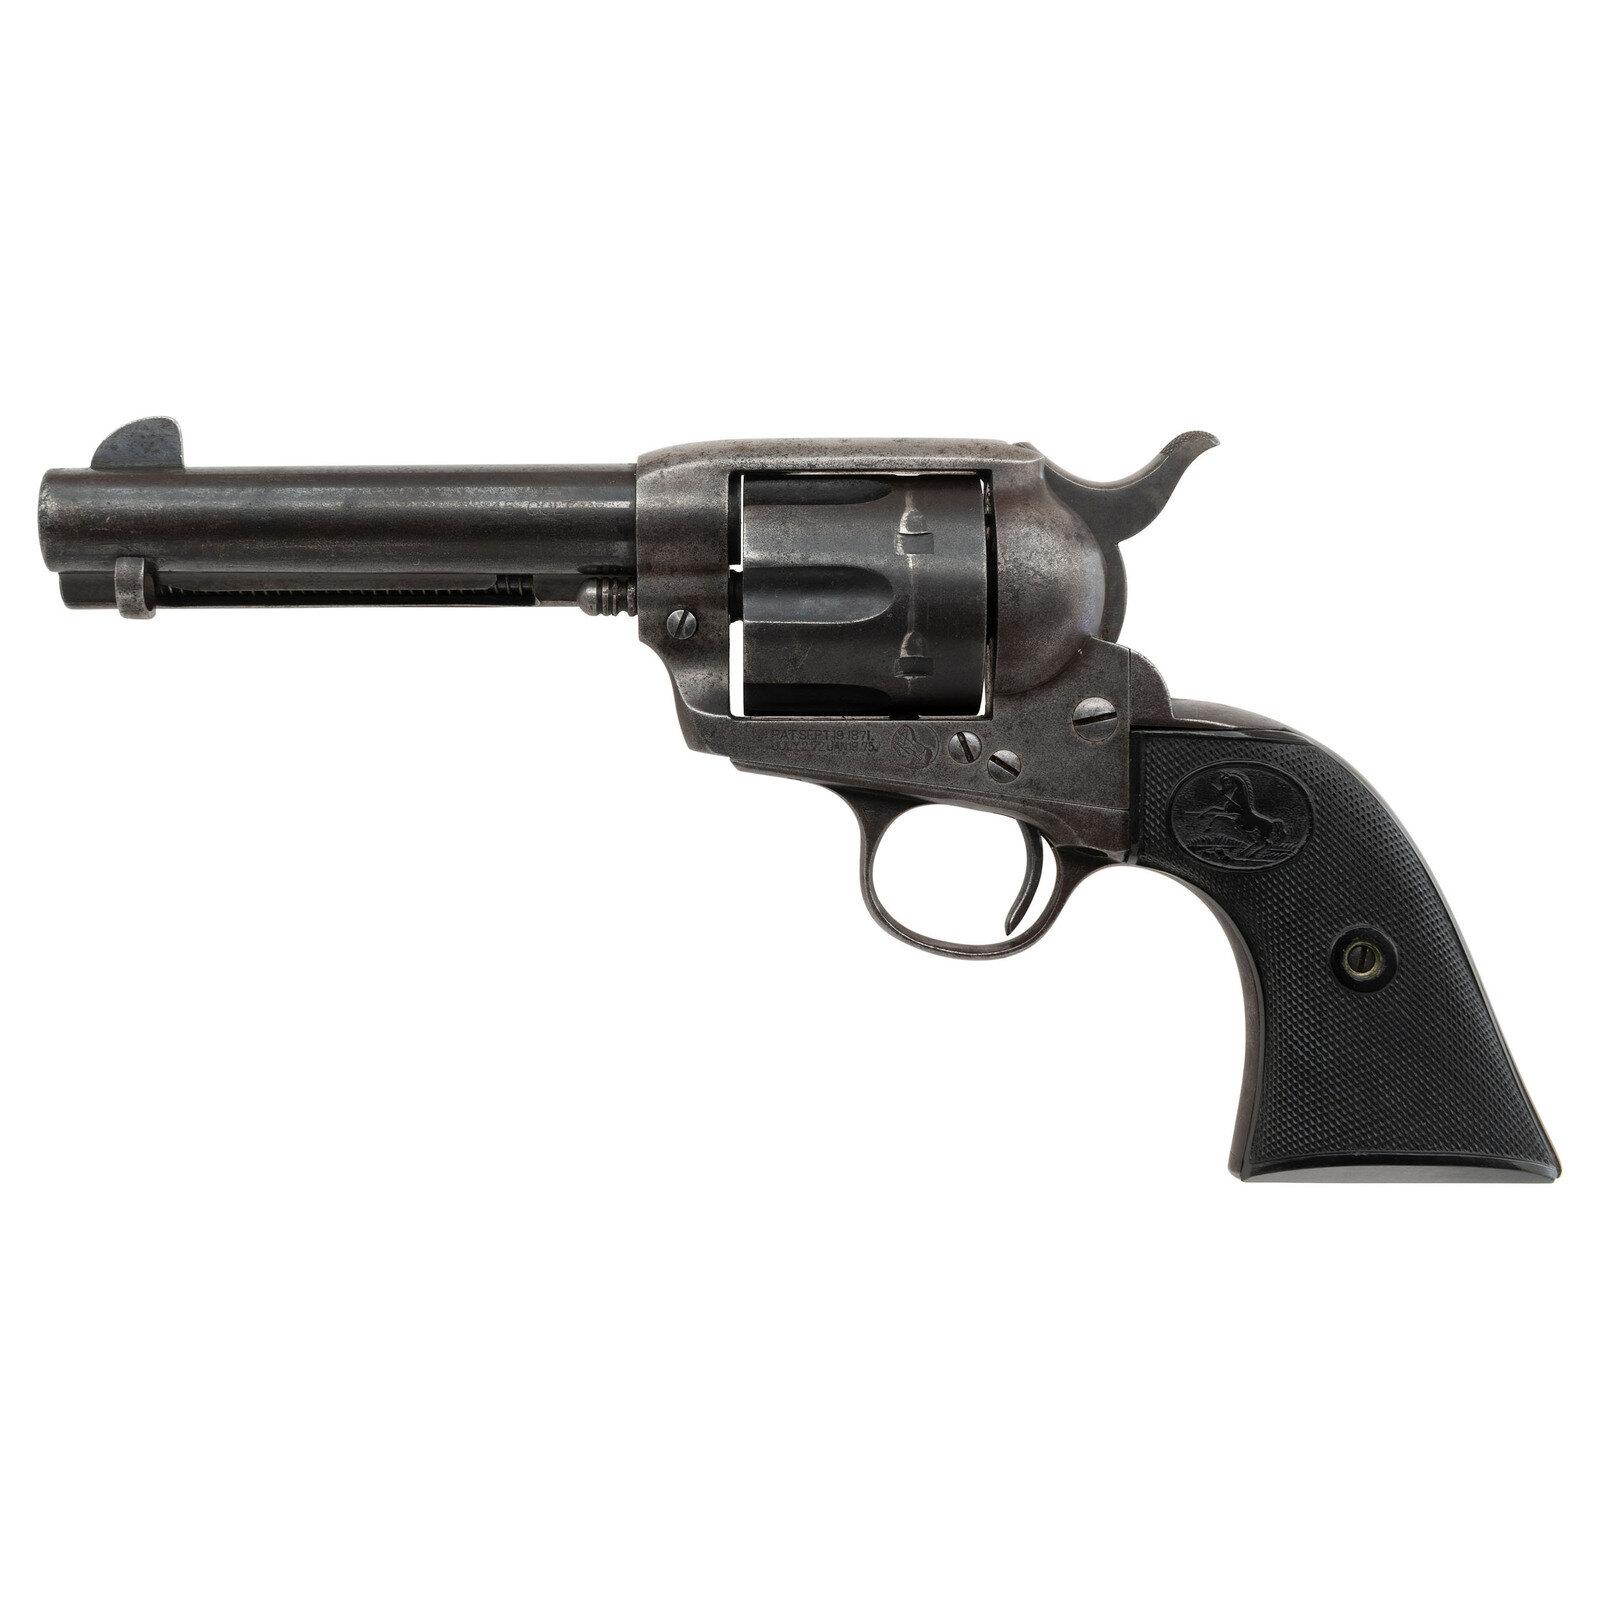 **1st Generation Colt Single Action Army